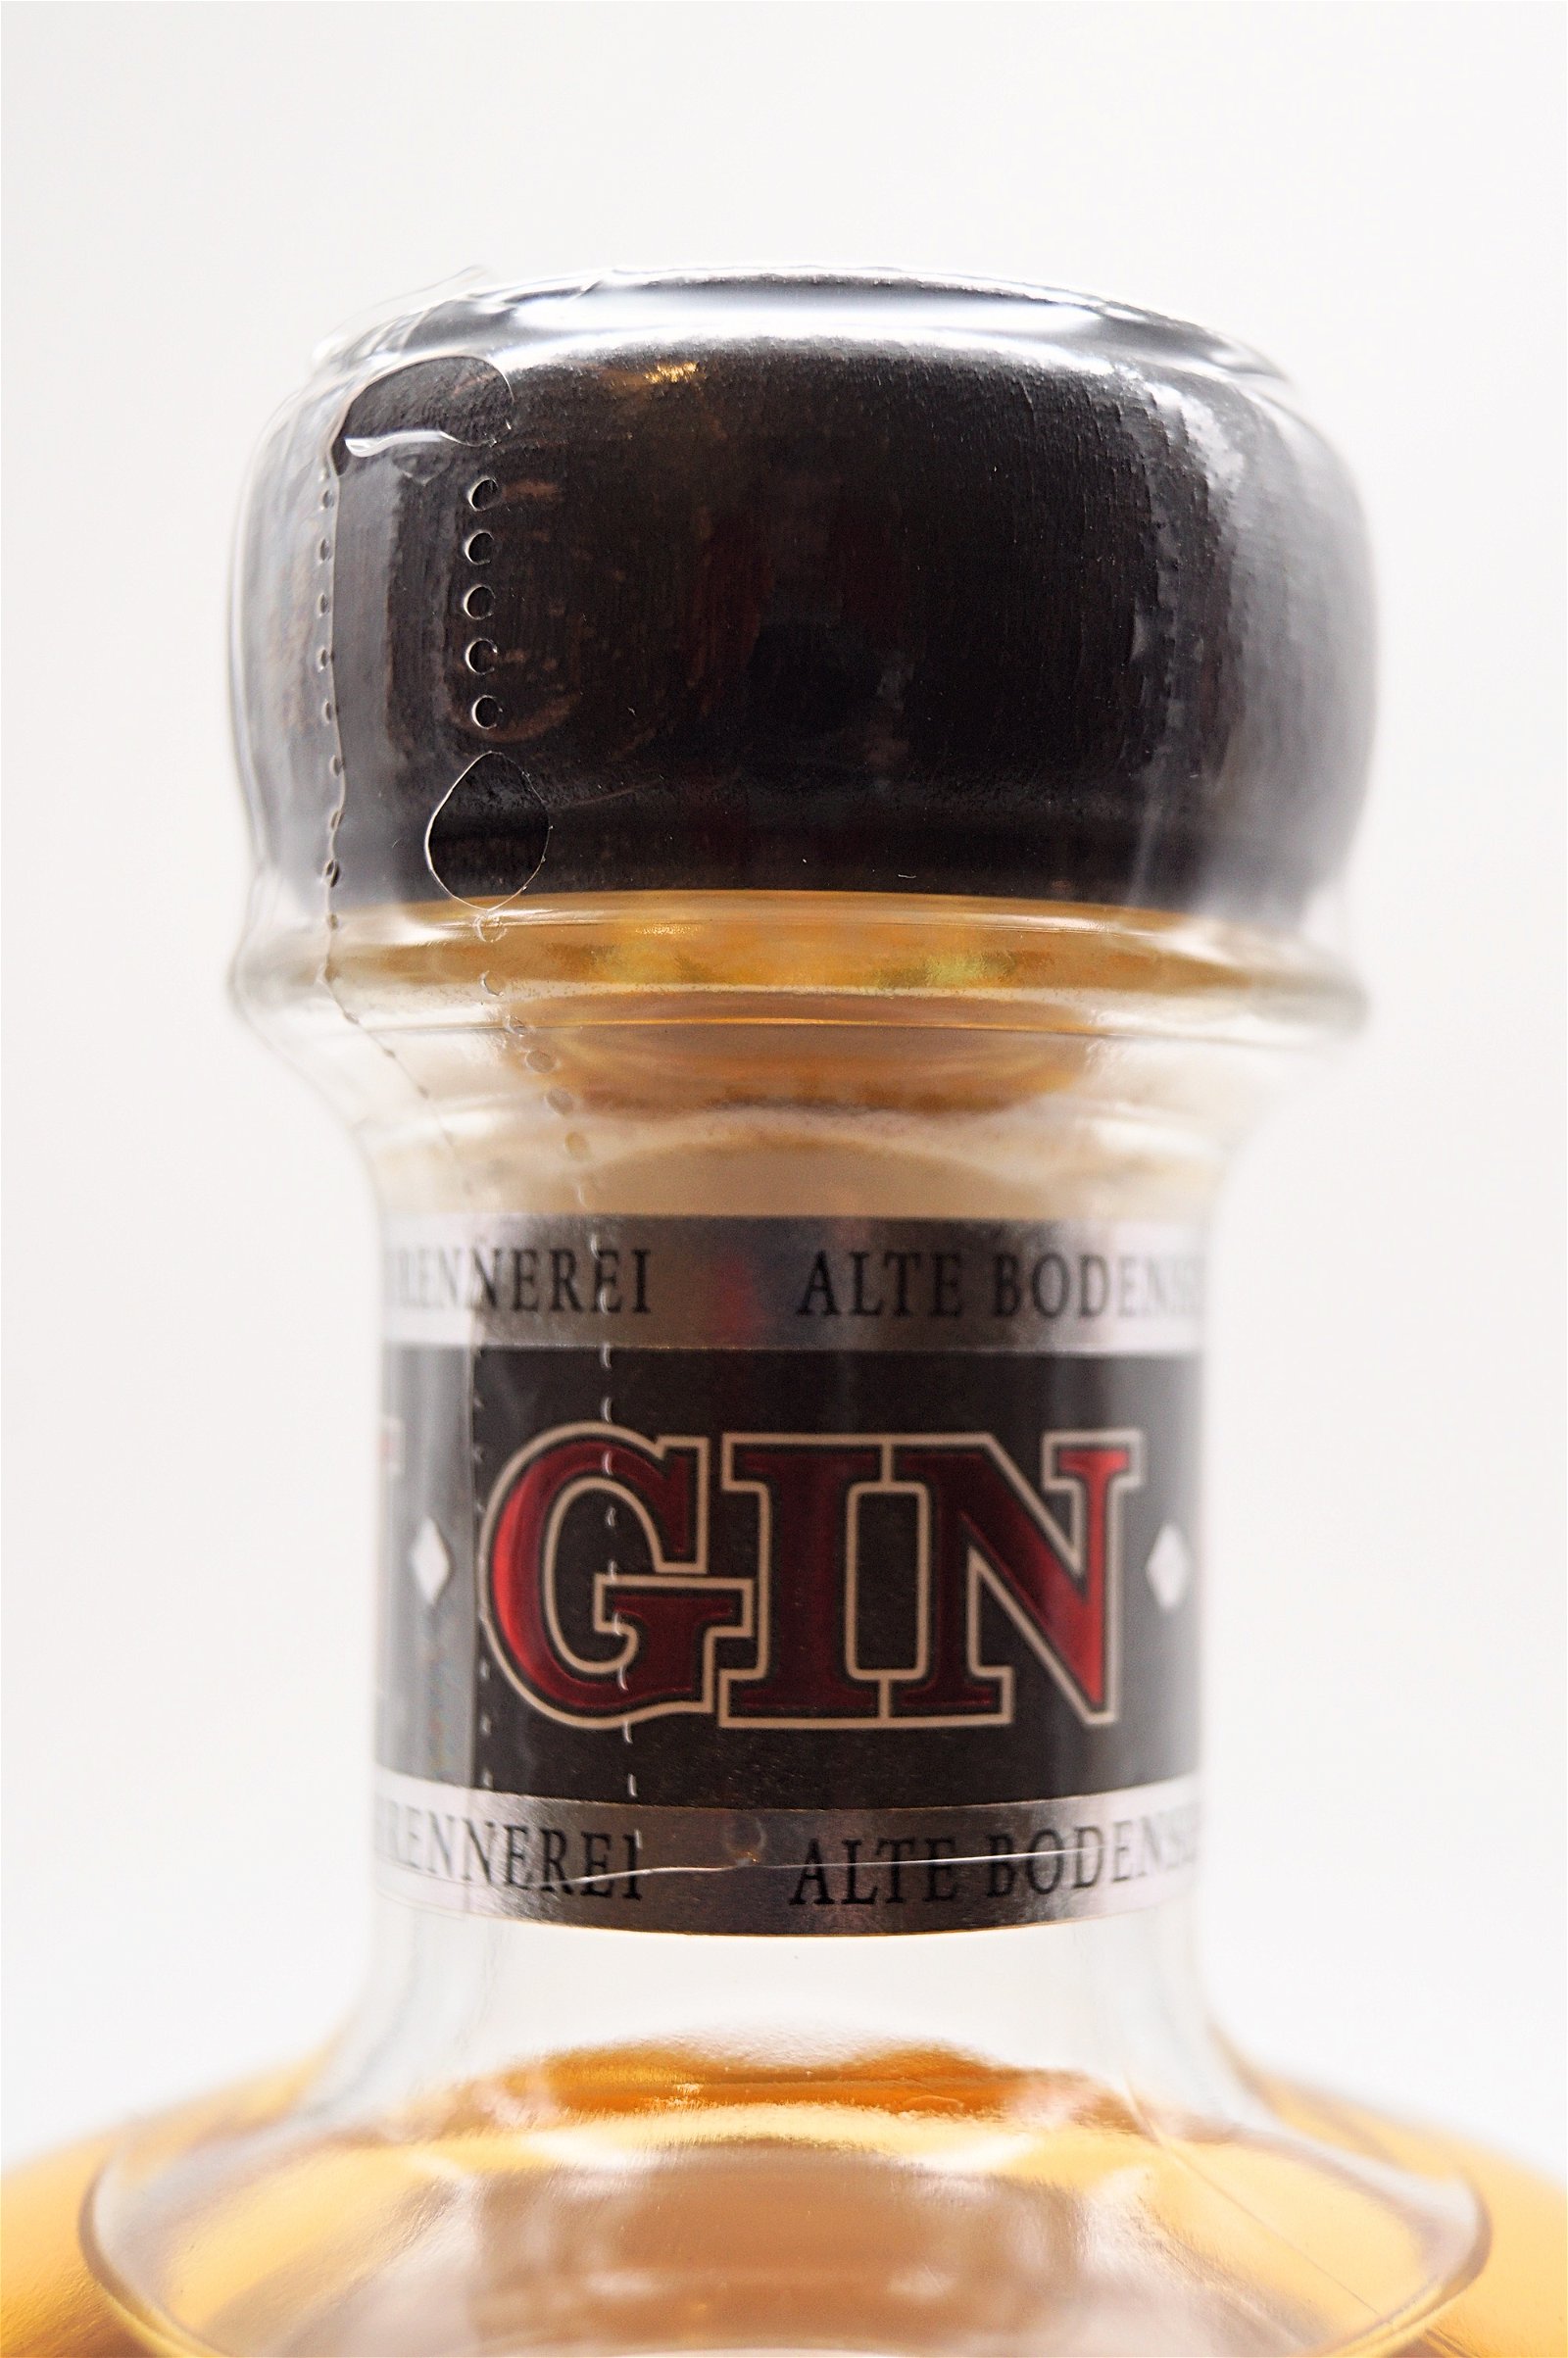 Steinhauser See Gin Red Reserve Gin 